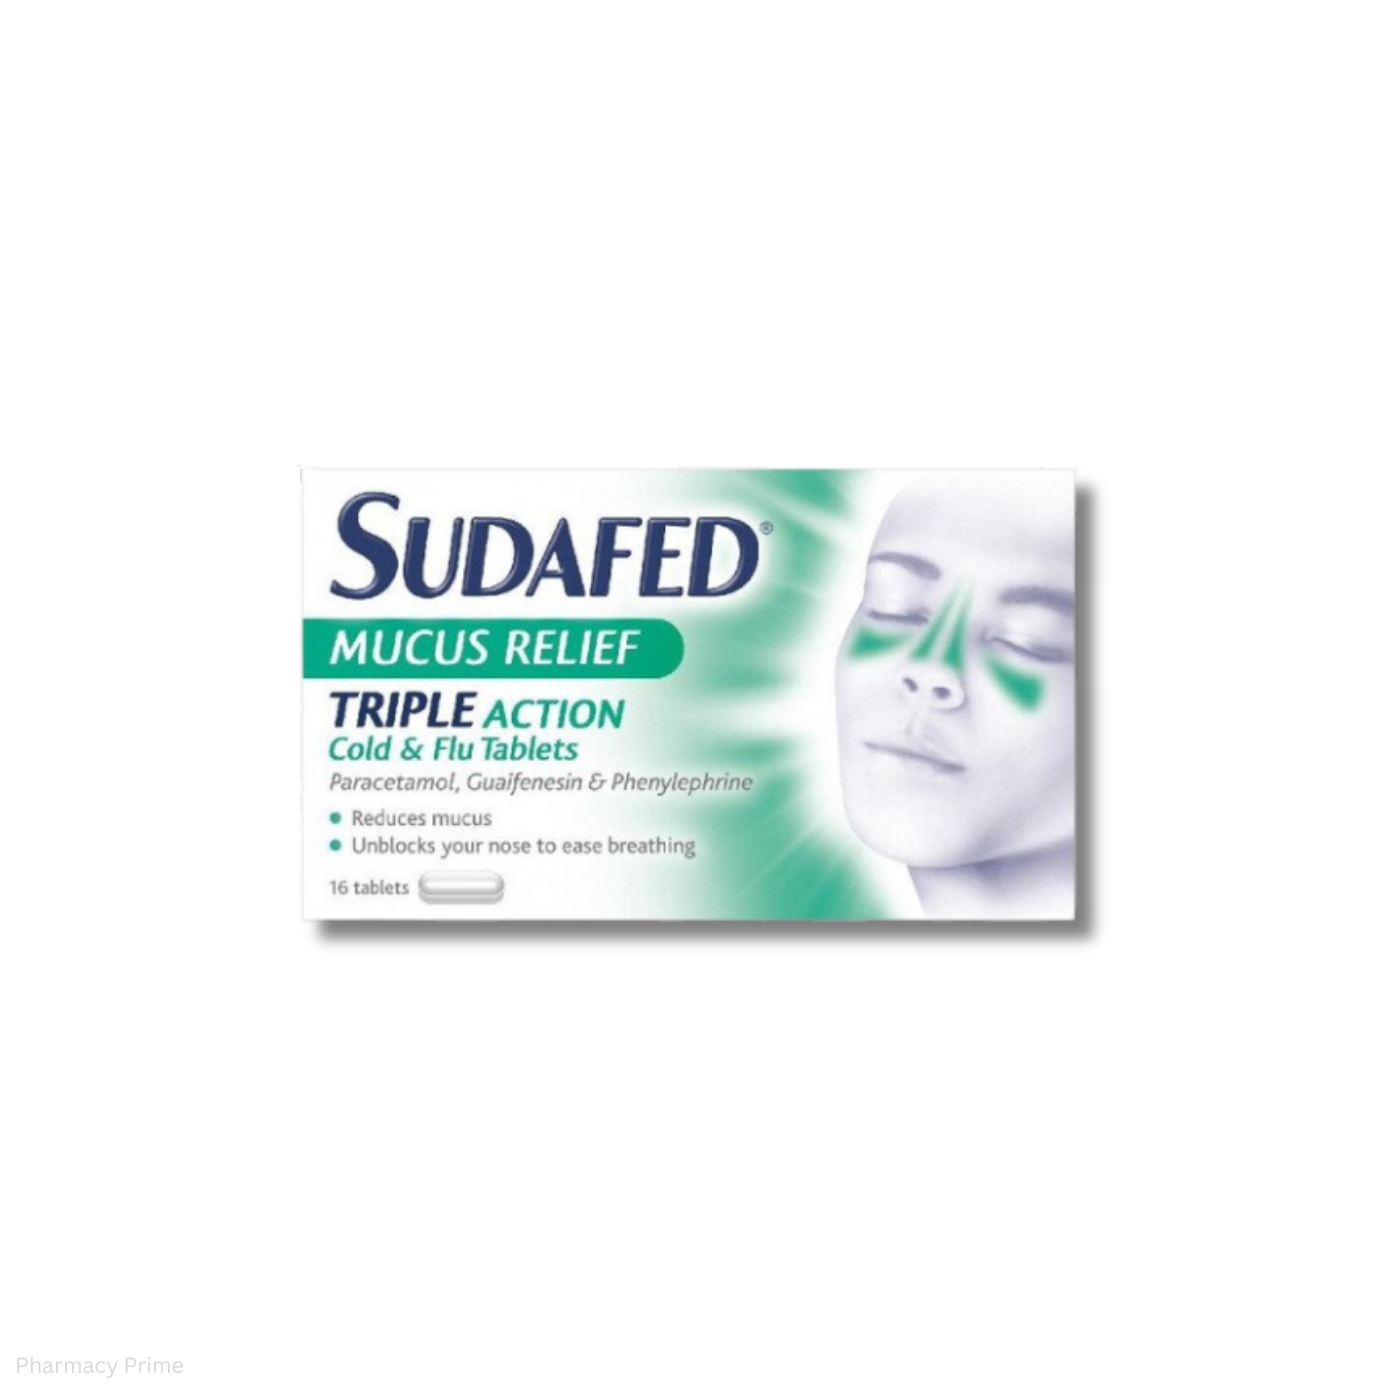 Sudafed Mucus Relief Triple Action - 16 Tablets